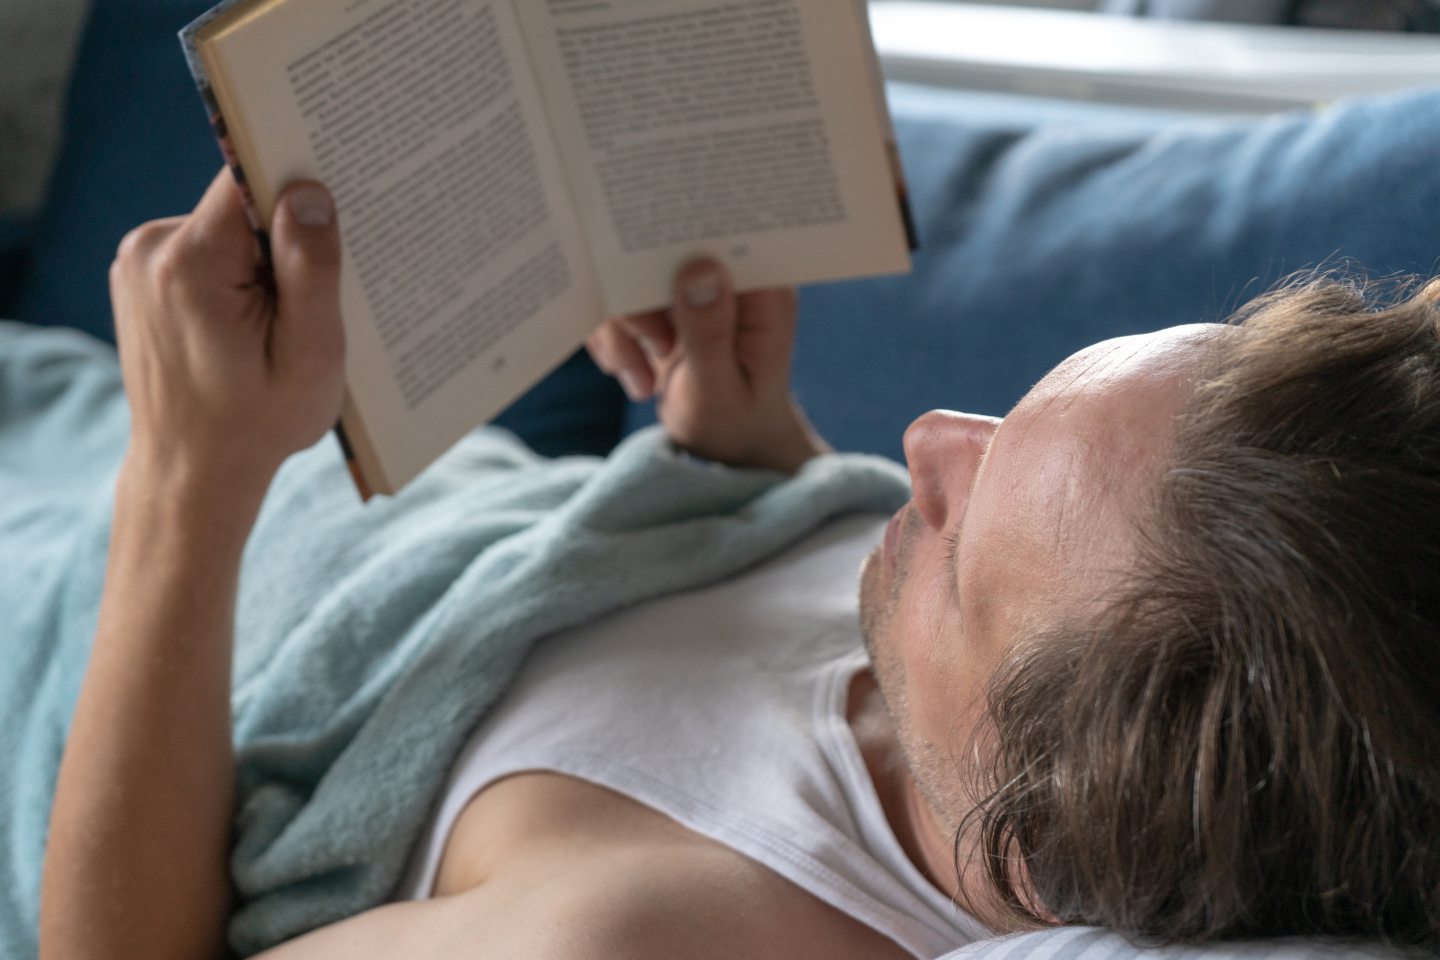 Man lying on the couch with blanket over him reading a book. One of Anne's tips for getting to sleep with insomnia is to wind down in the evening with a laid-back activity like reading.